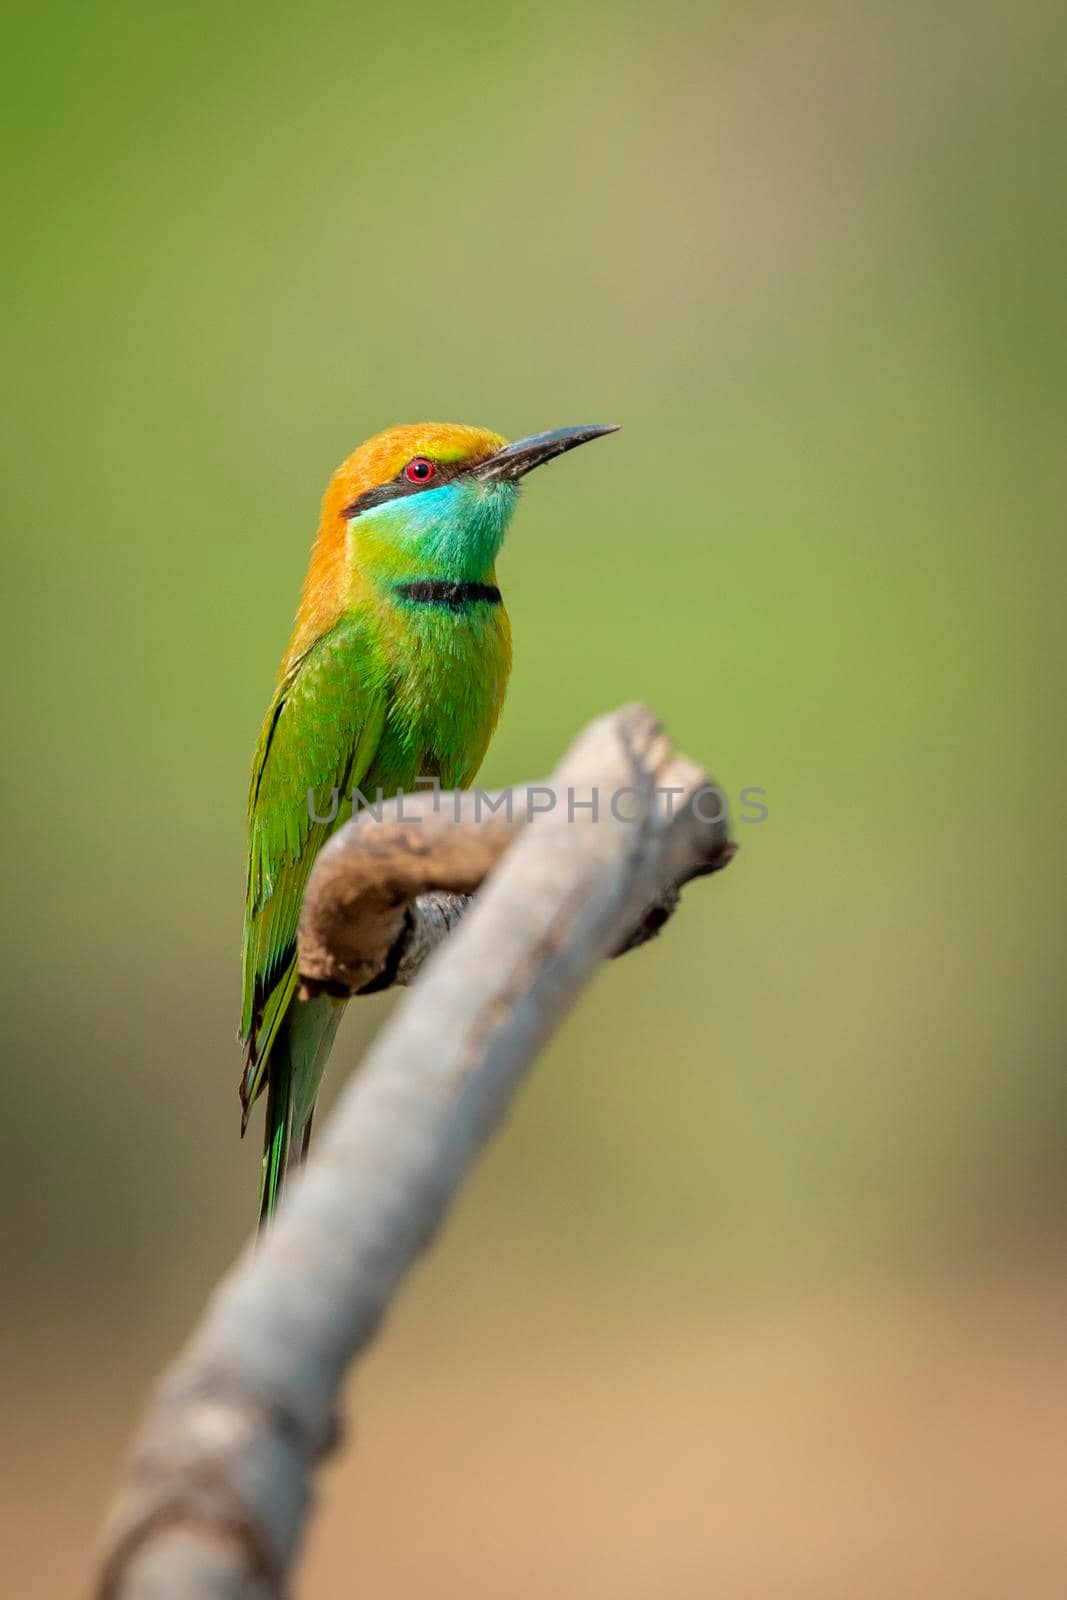 Image of Green Bee-eater bird(Merops orientalis) on a tree branch on nature background. Bird. Animals.